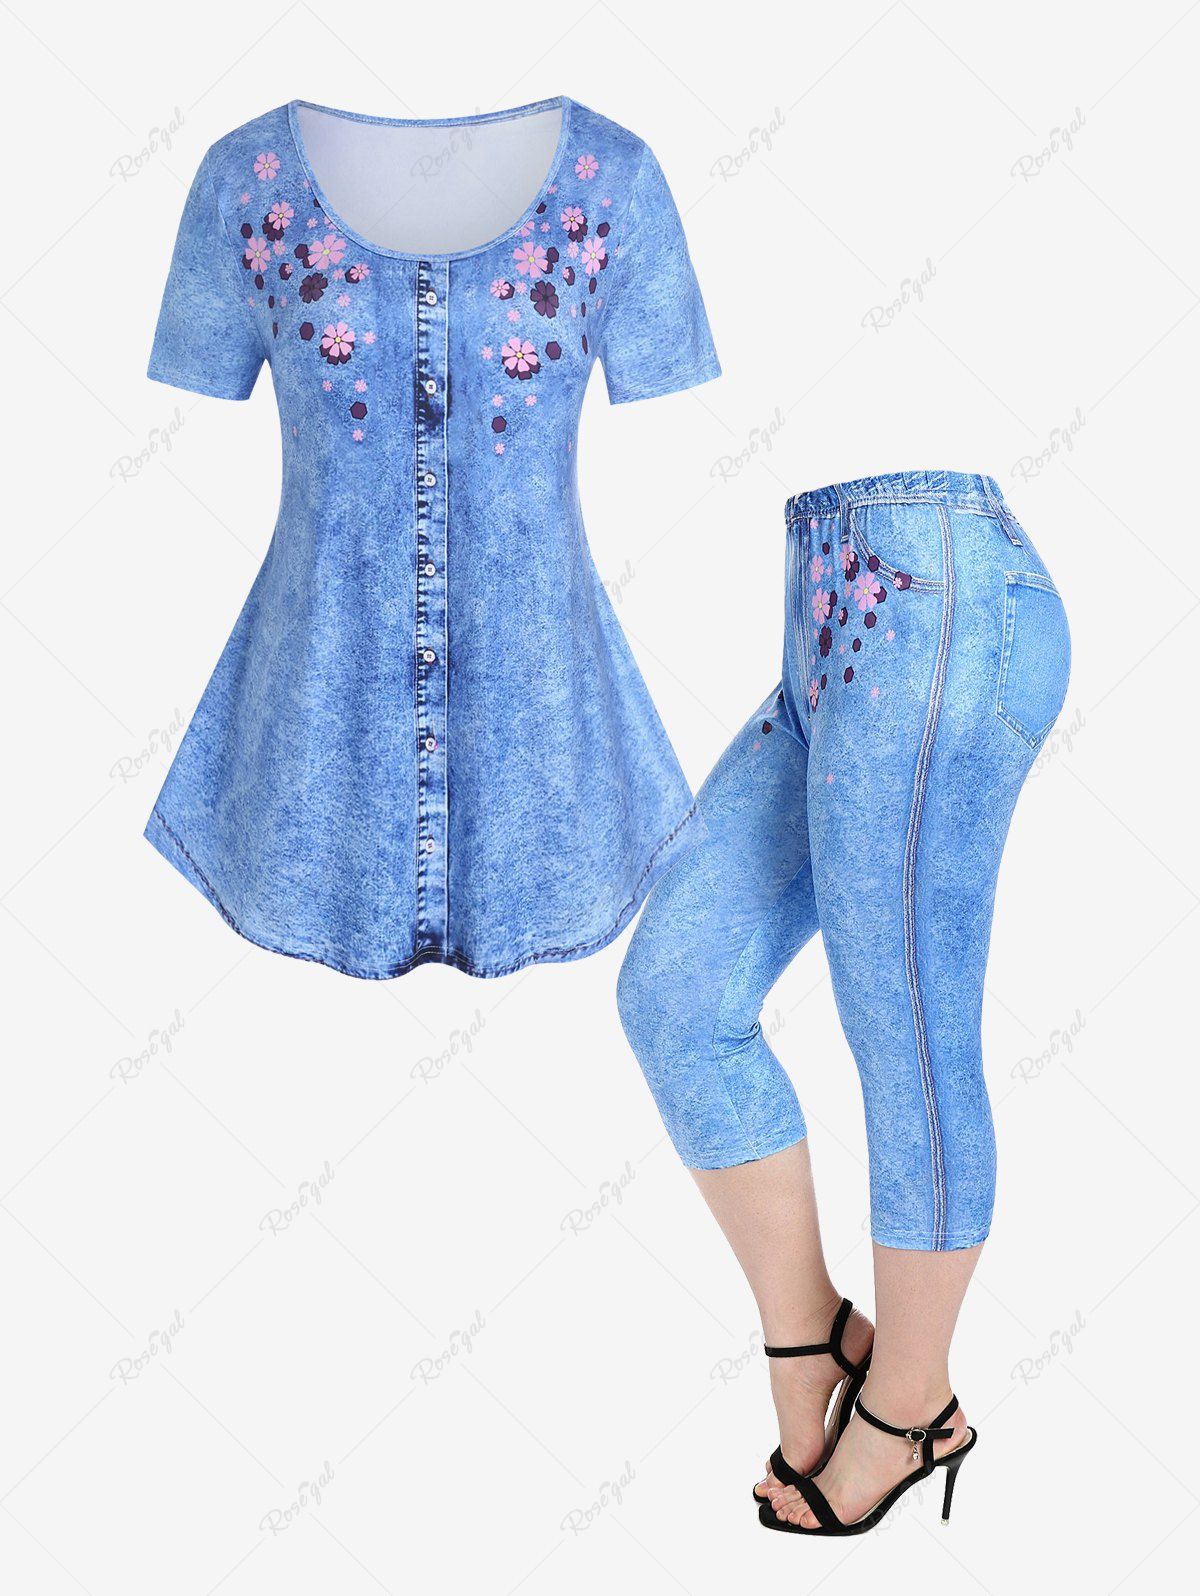 Online 3D Jeans Foral Printed Tee and 3D Jeans Floral Printed Leggings Plus Size Summer Outfit  